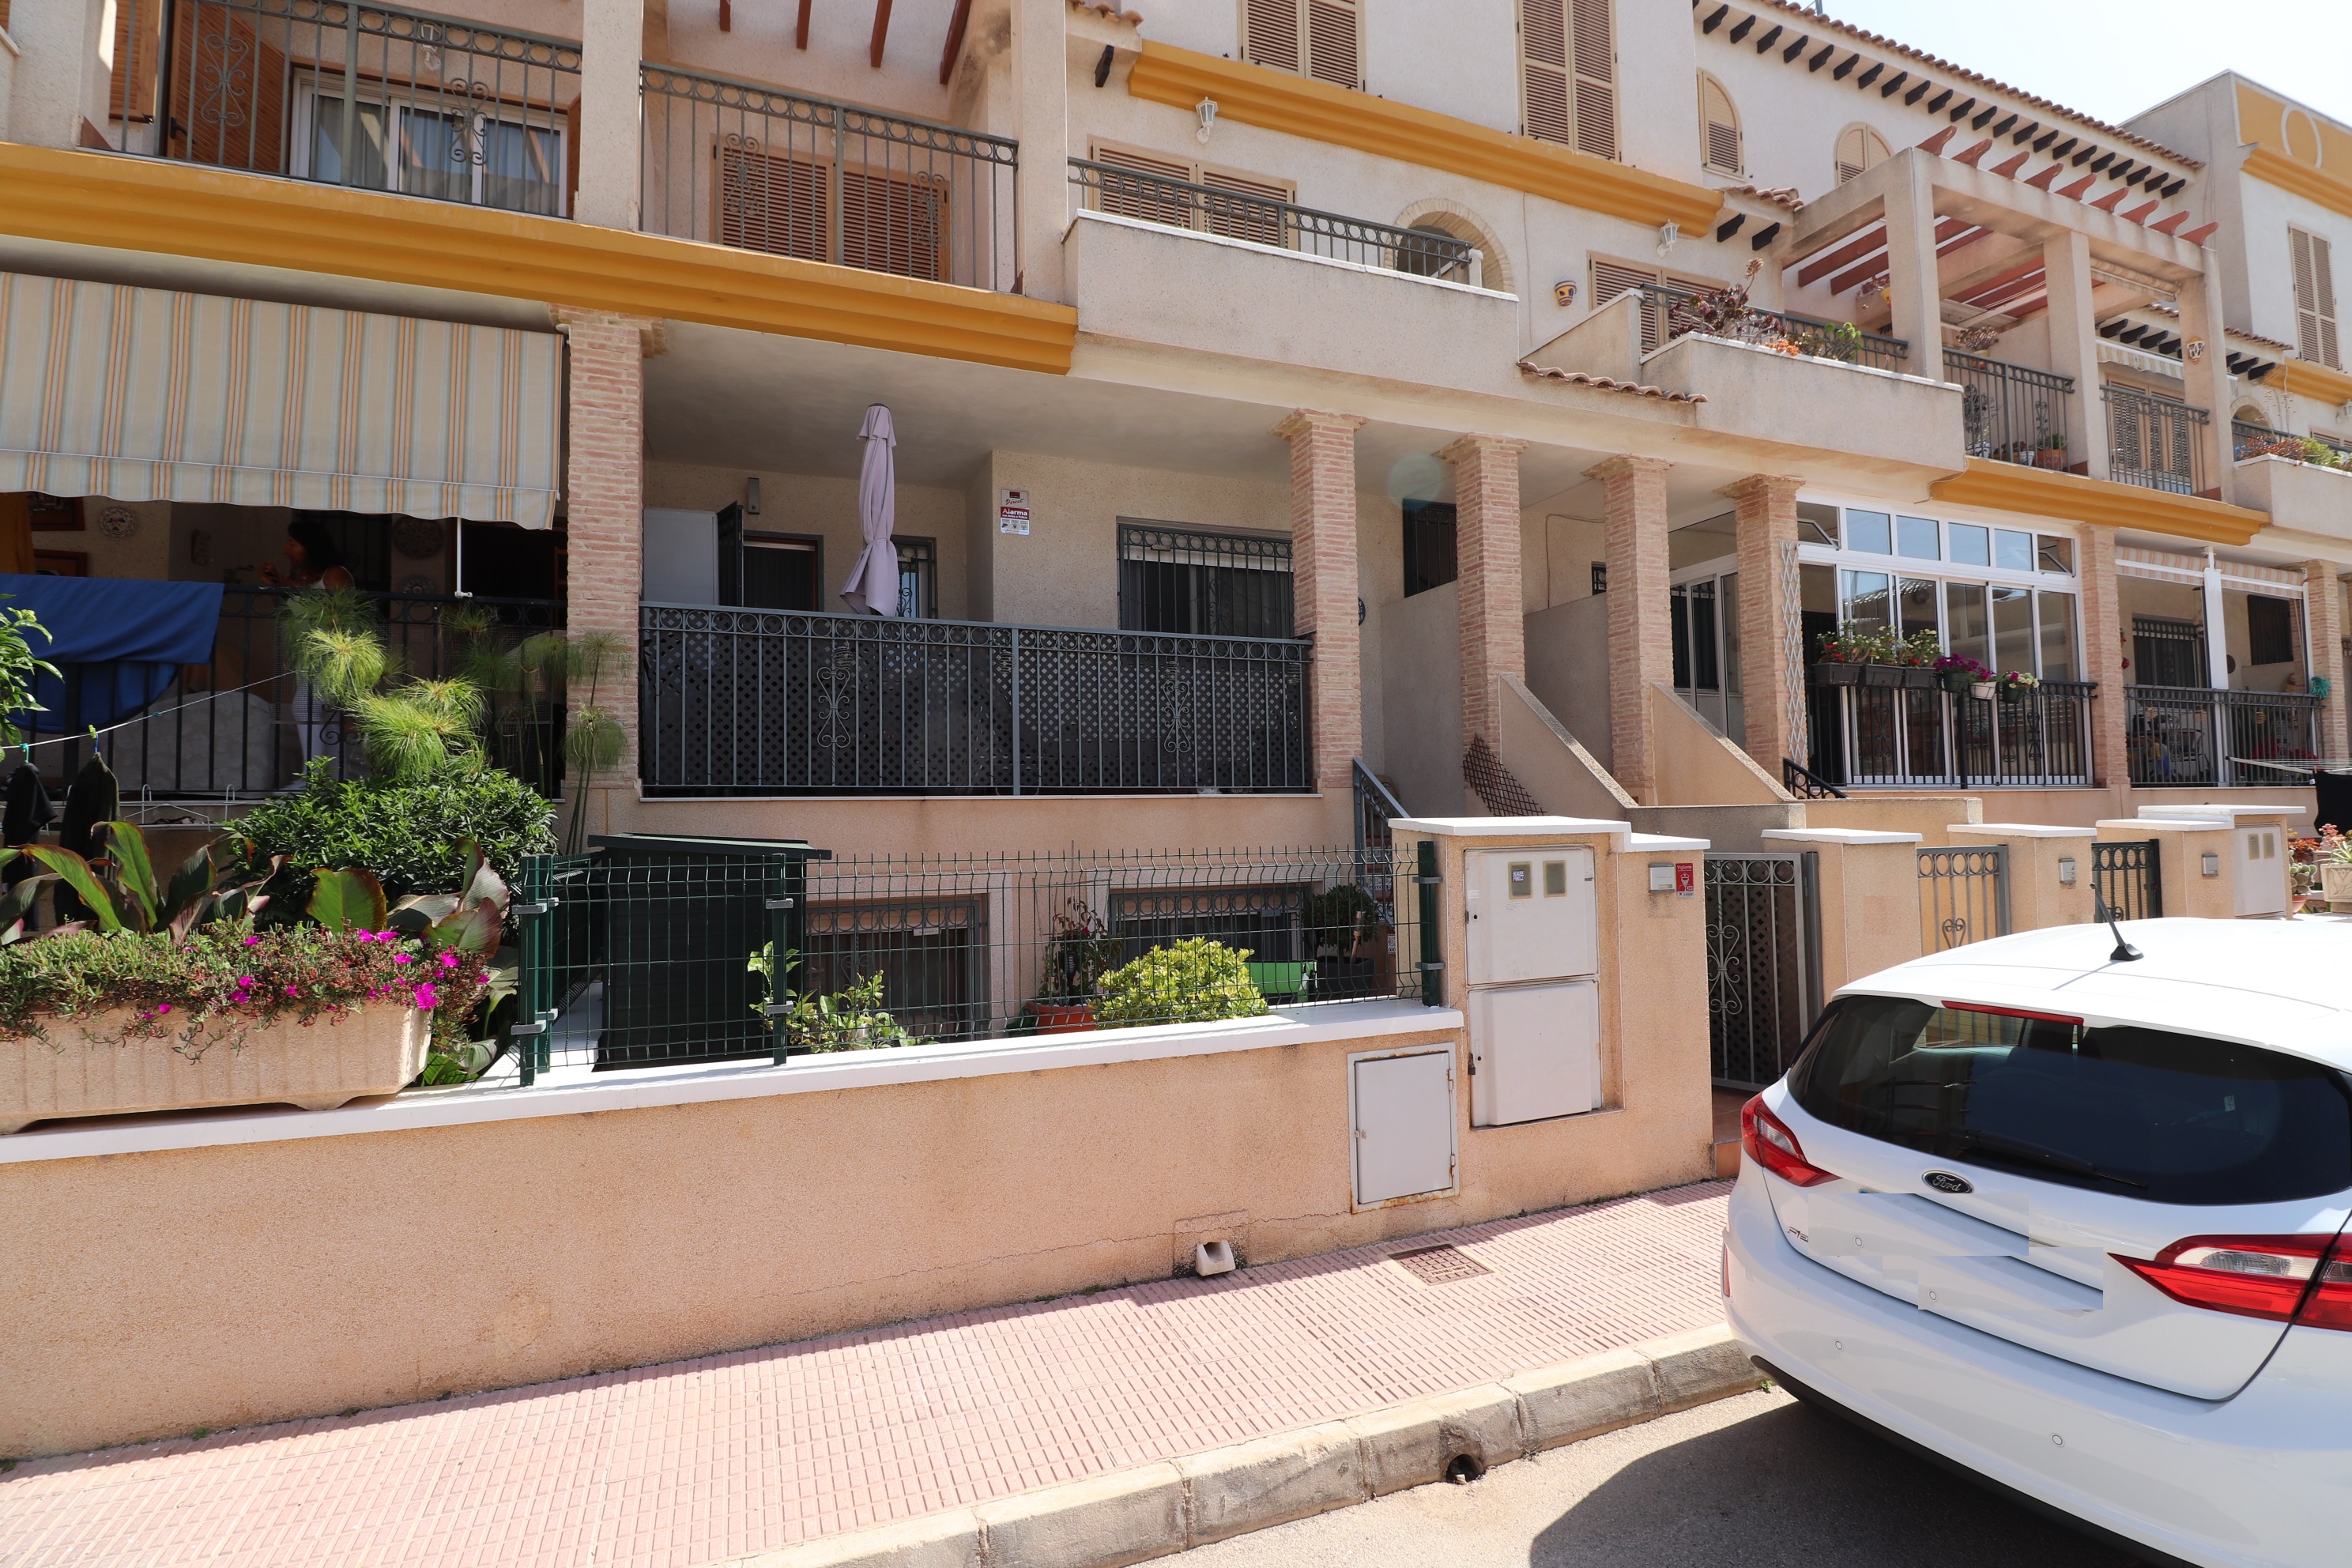 Qlistings - 2 Bedroom Townhouse For Sale In Daya Vieja Property Image